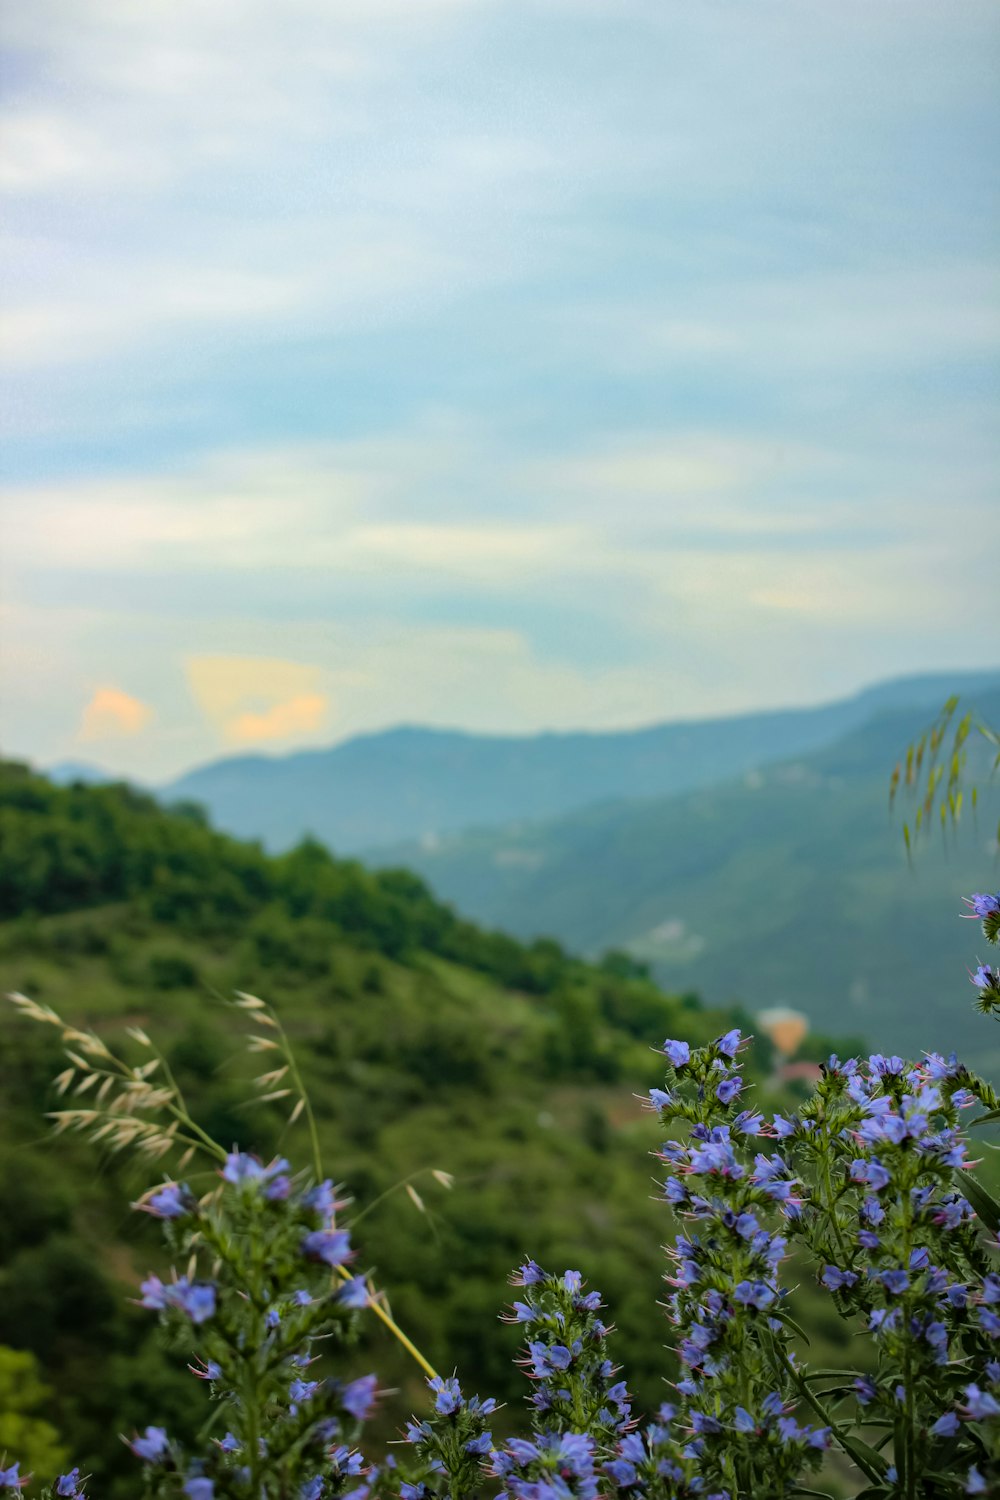 a view of a mountain range with blue flowers in the foreground